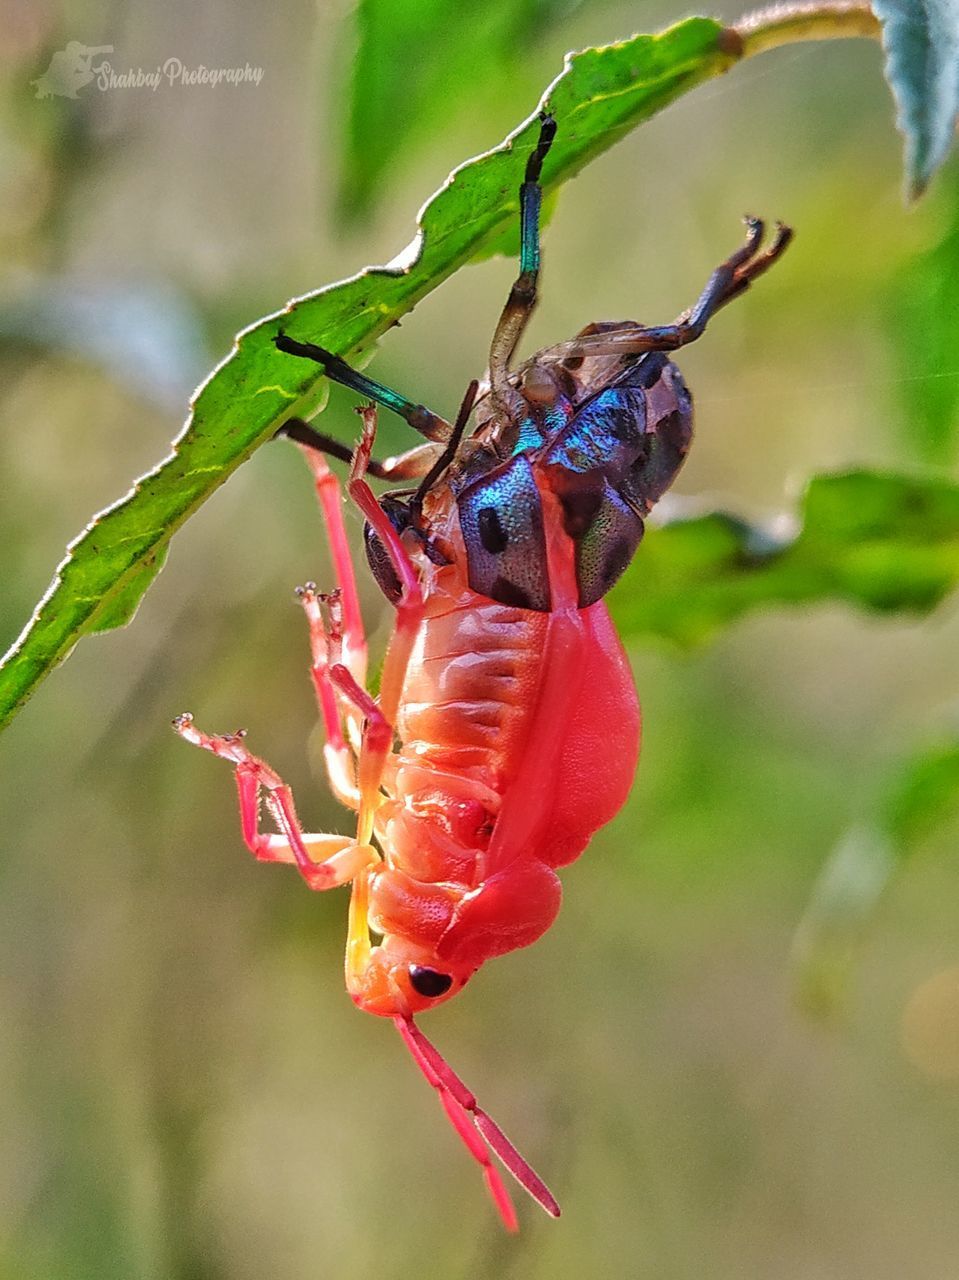 CLOSE-UP OF INSECT ON RED FLOWER